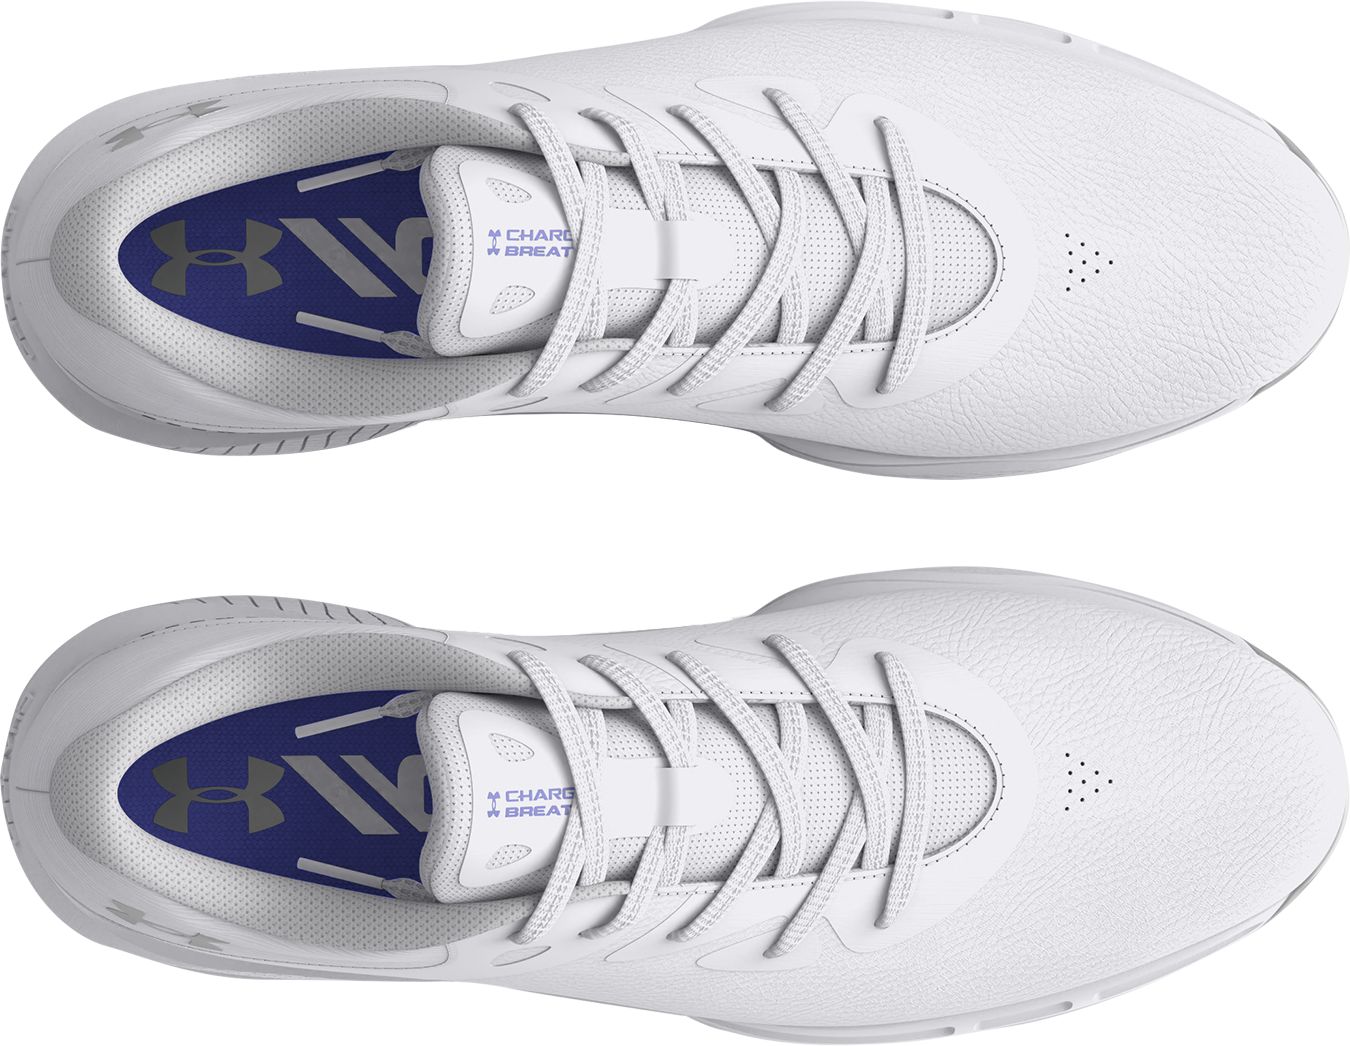 UNDER ARMOUR, W CHARGED BREATHE 2